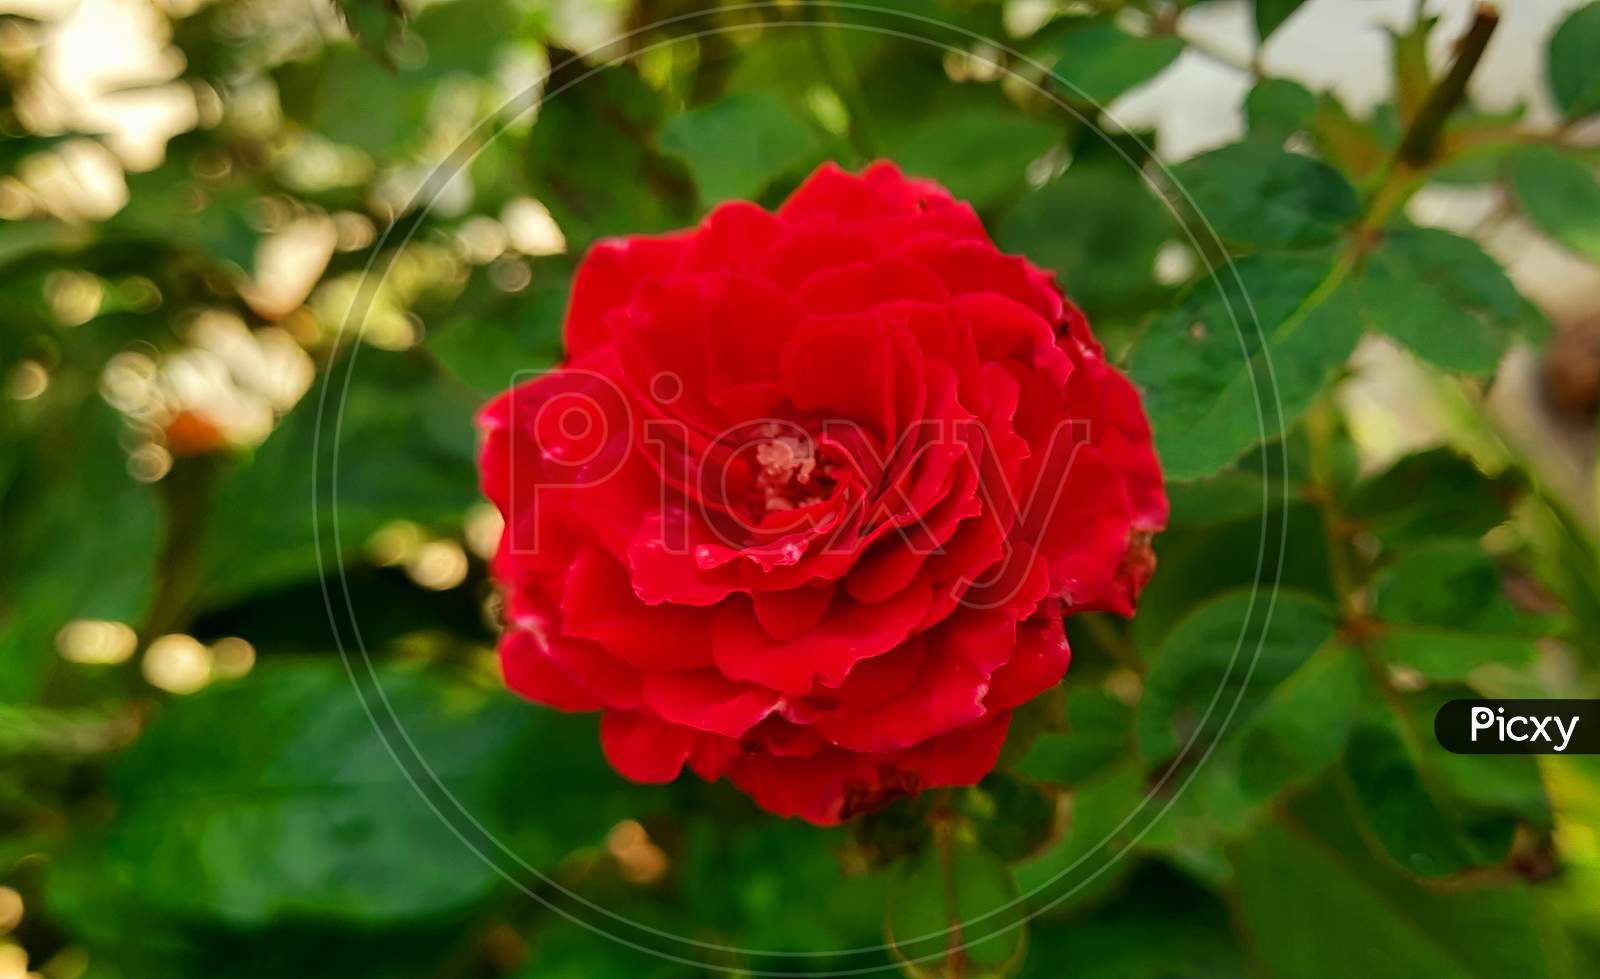 red rose flowers on water drops